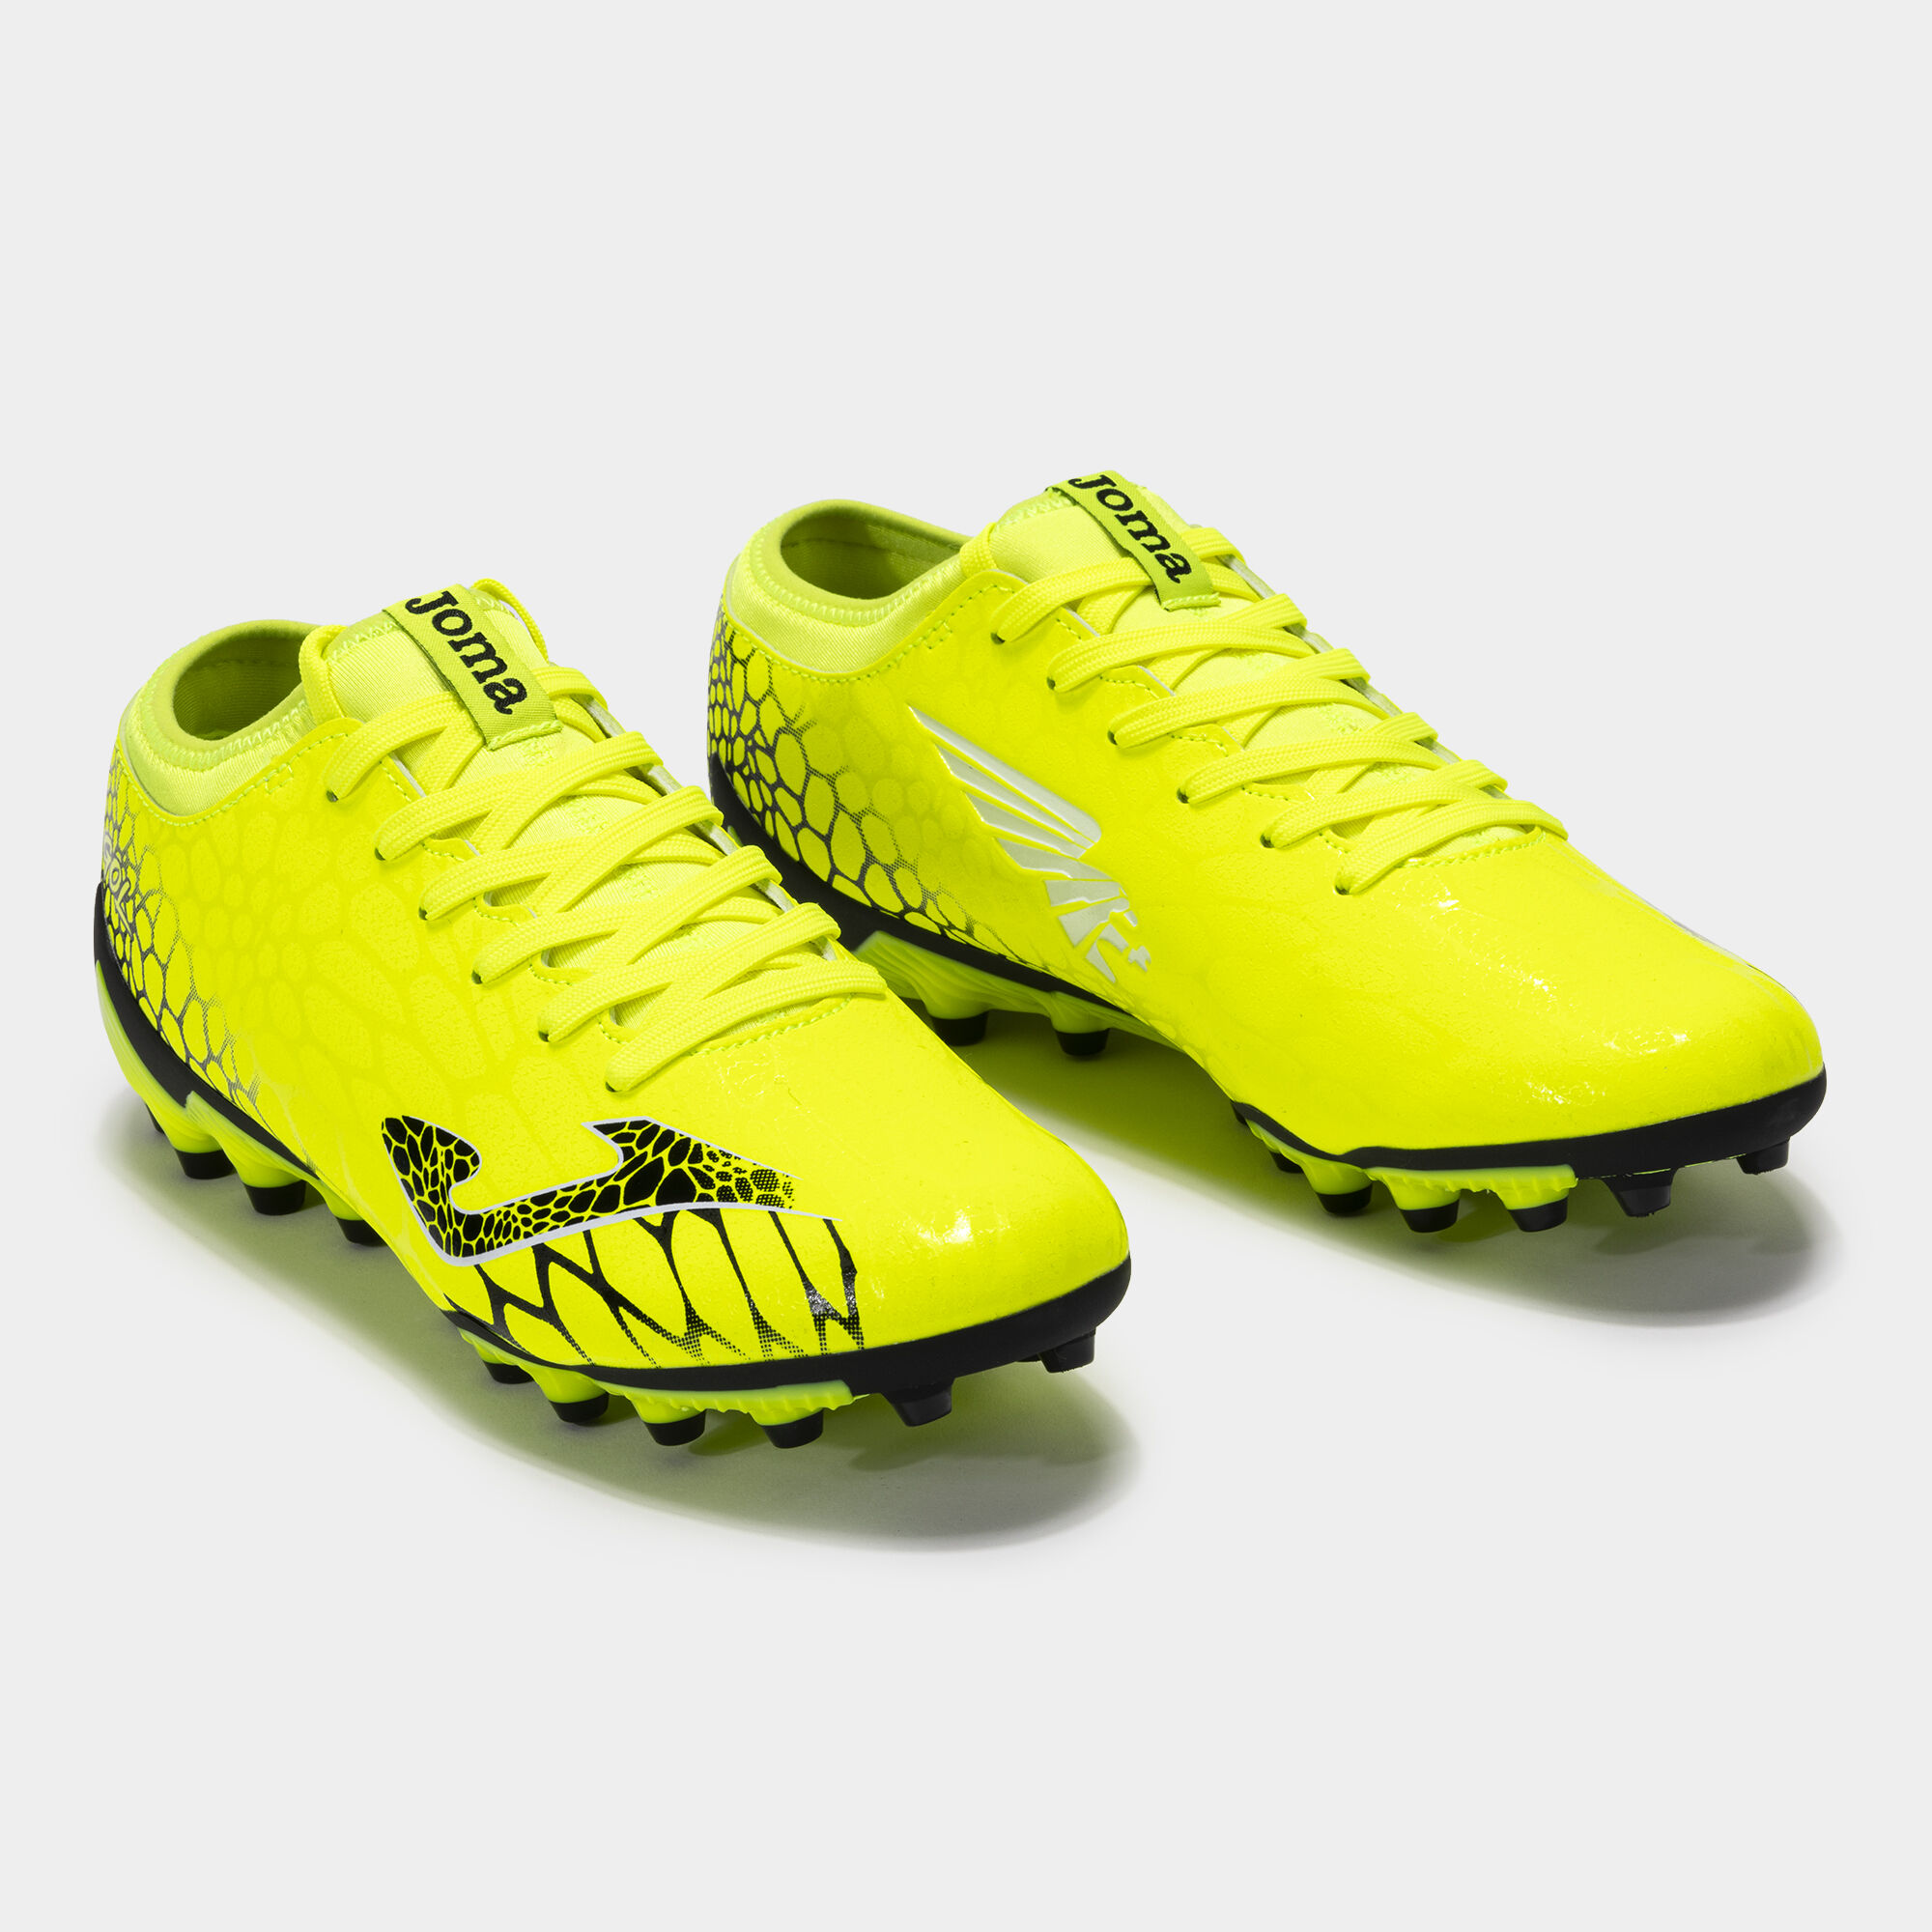 Chaussures football Gol 24 gazon synthétique AG jaune fluo